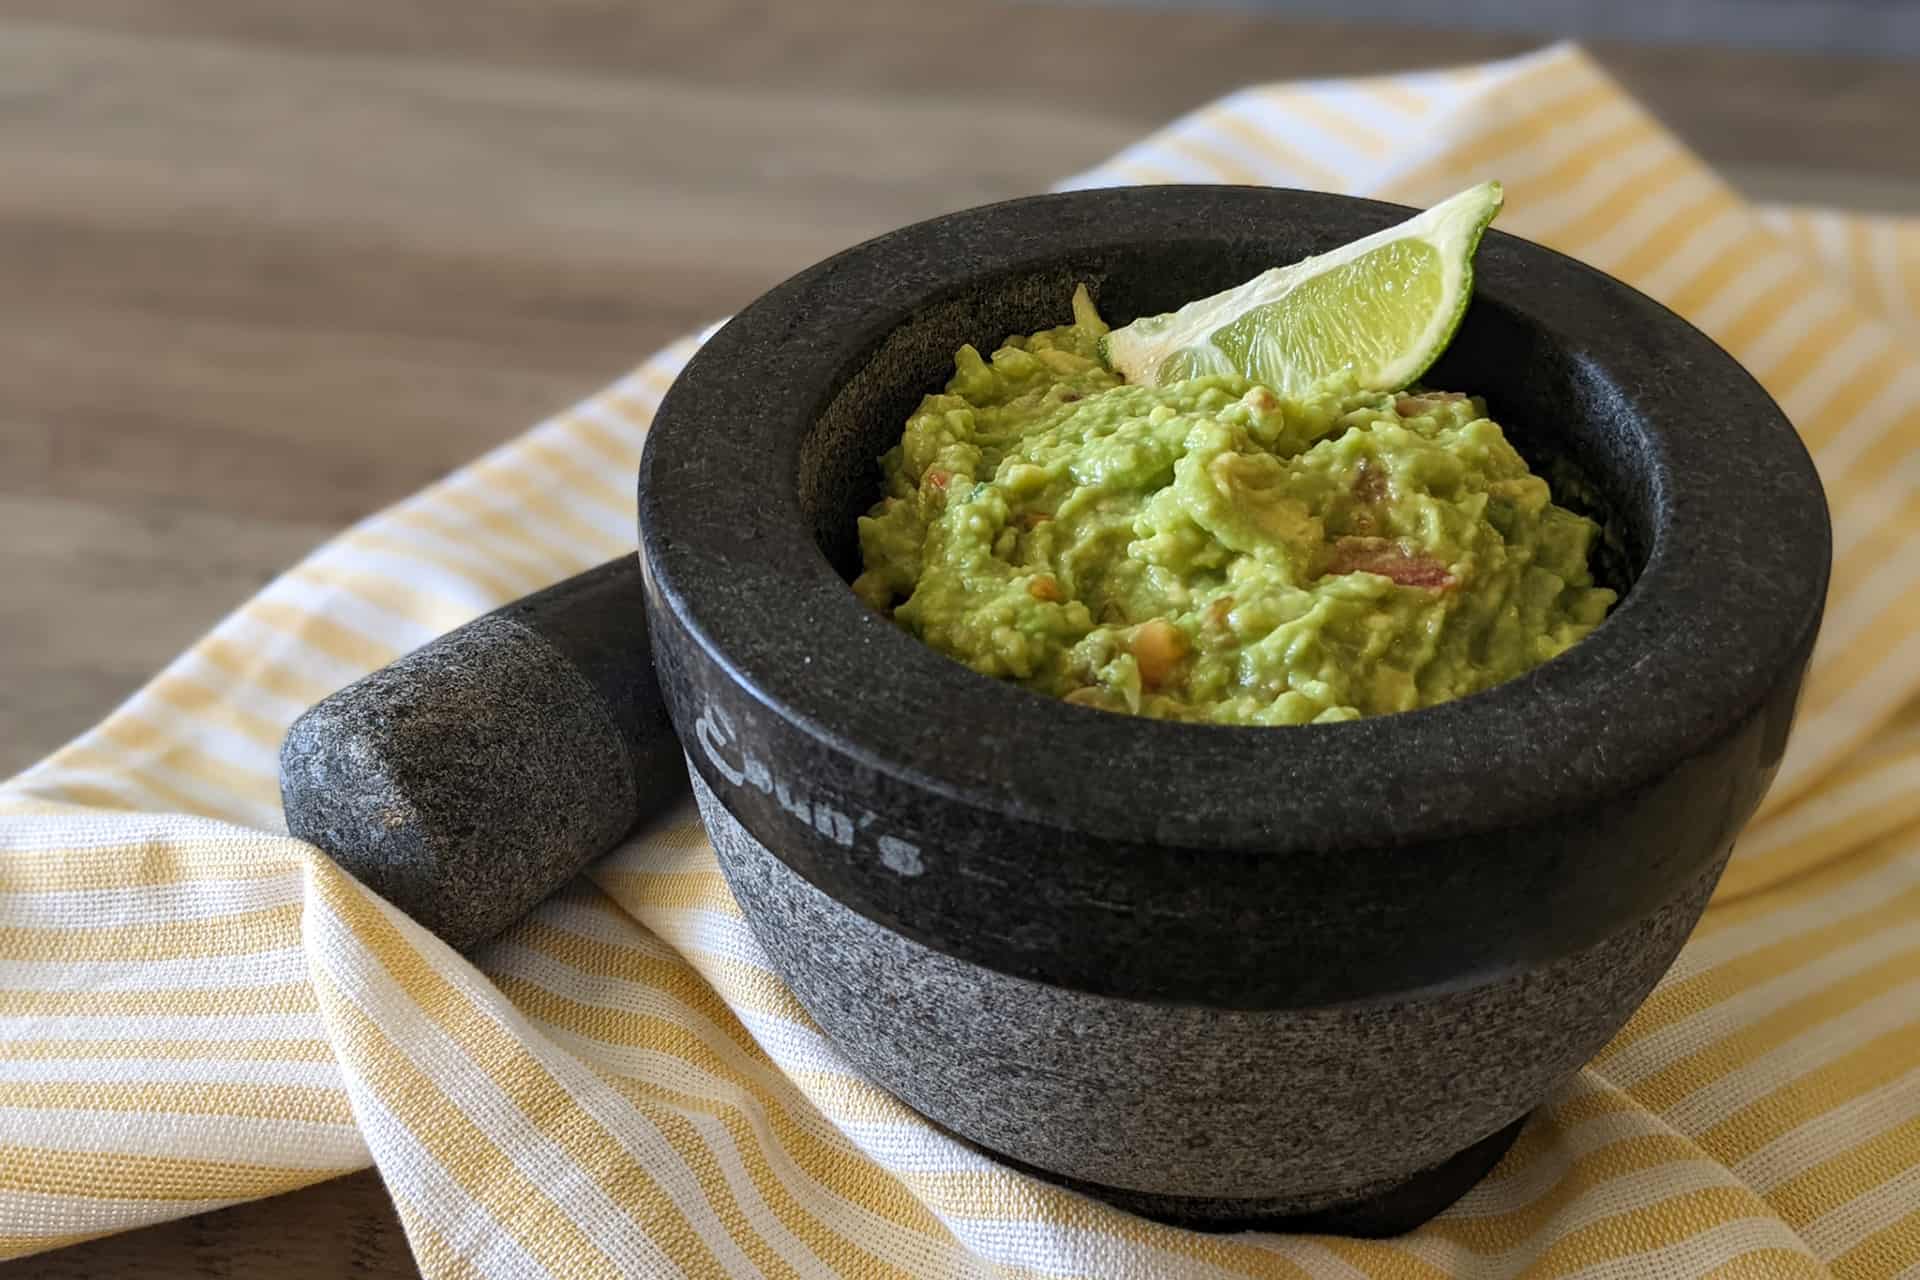 Fresh guacamole in a mortar and pestle garnished with a lime